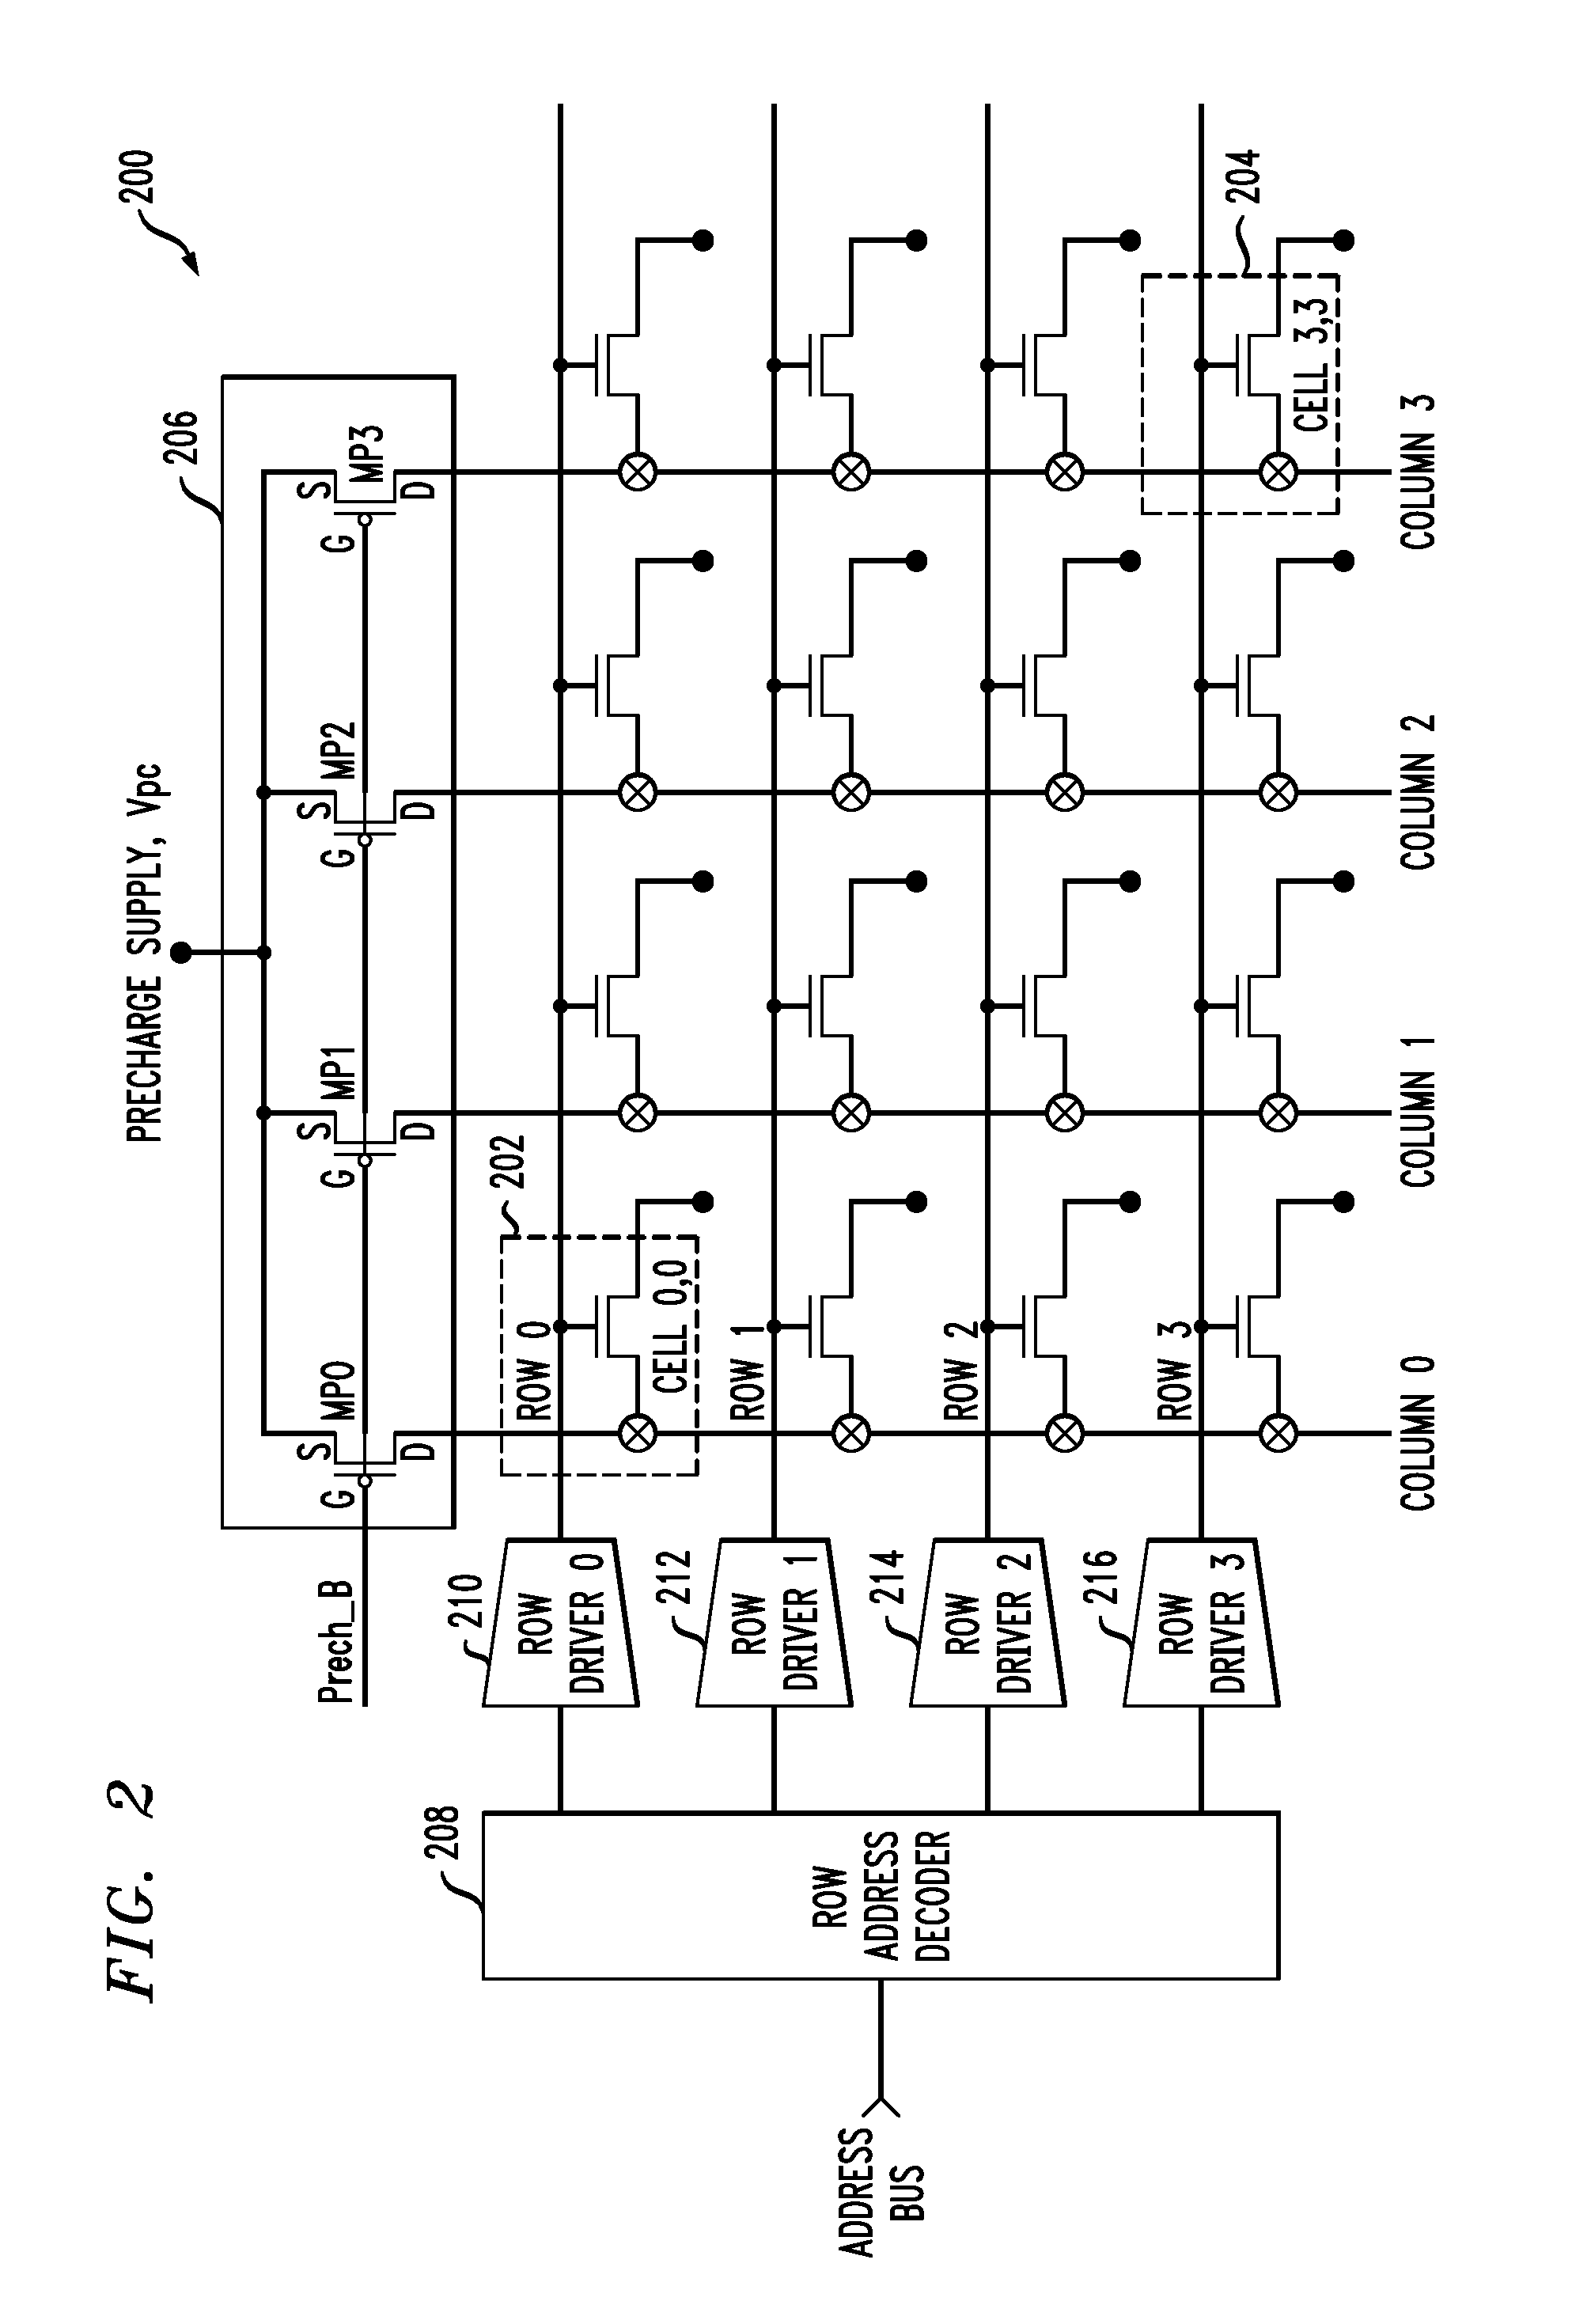 Reduced leakage driver circuit and memory device employing same